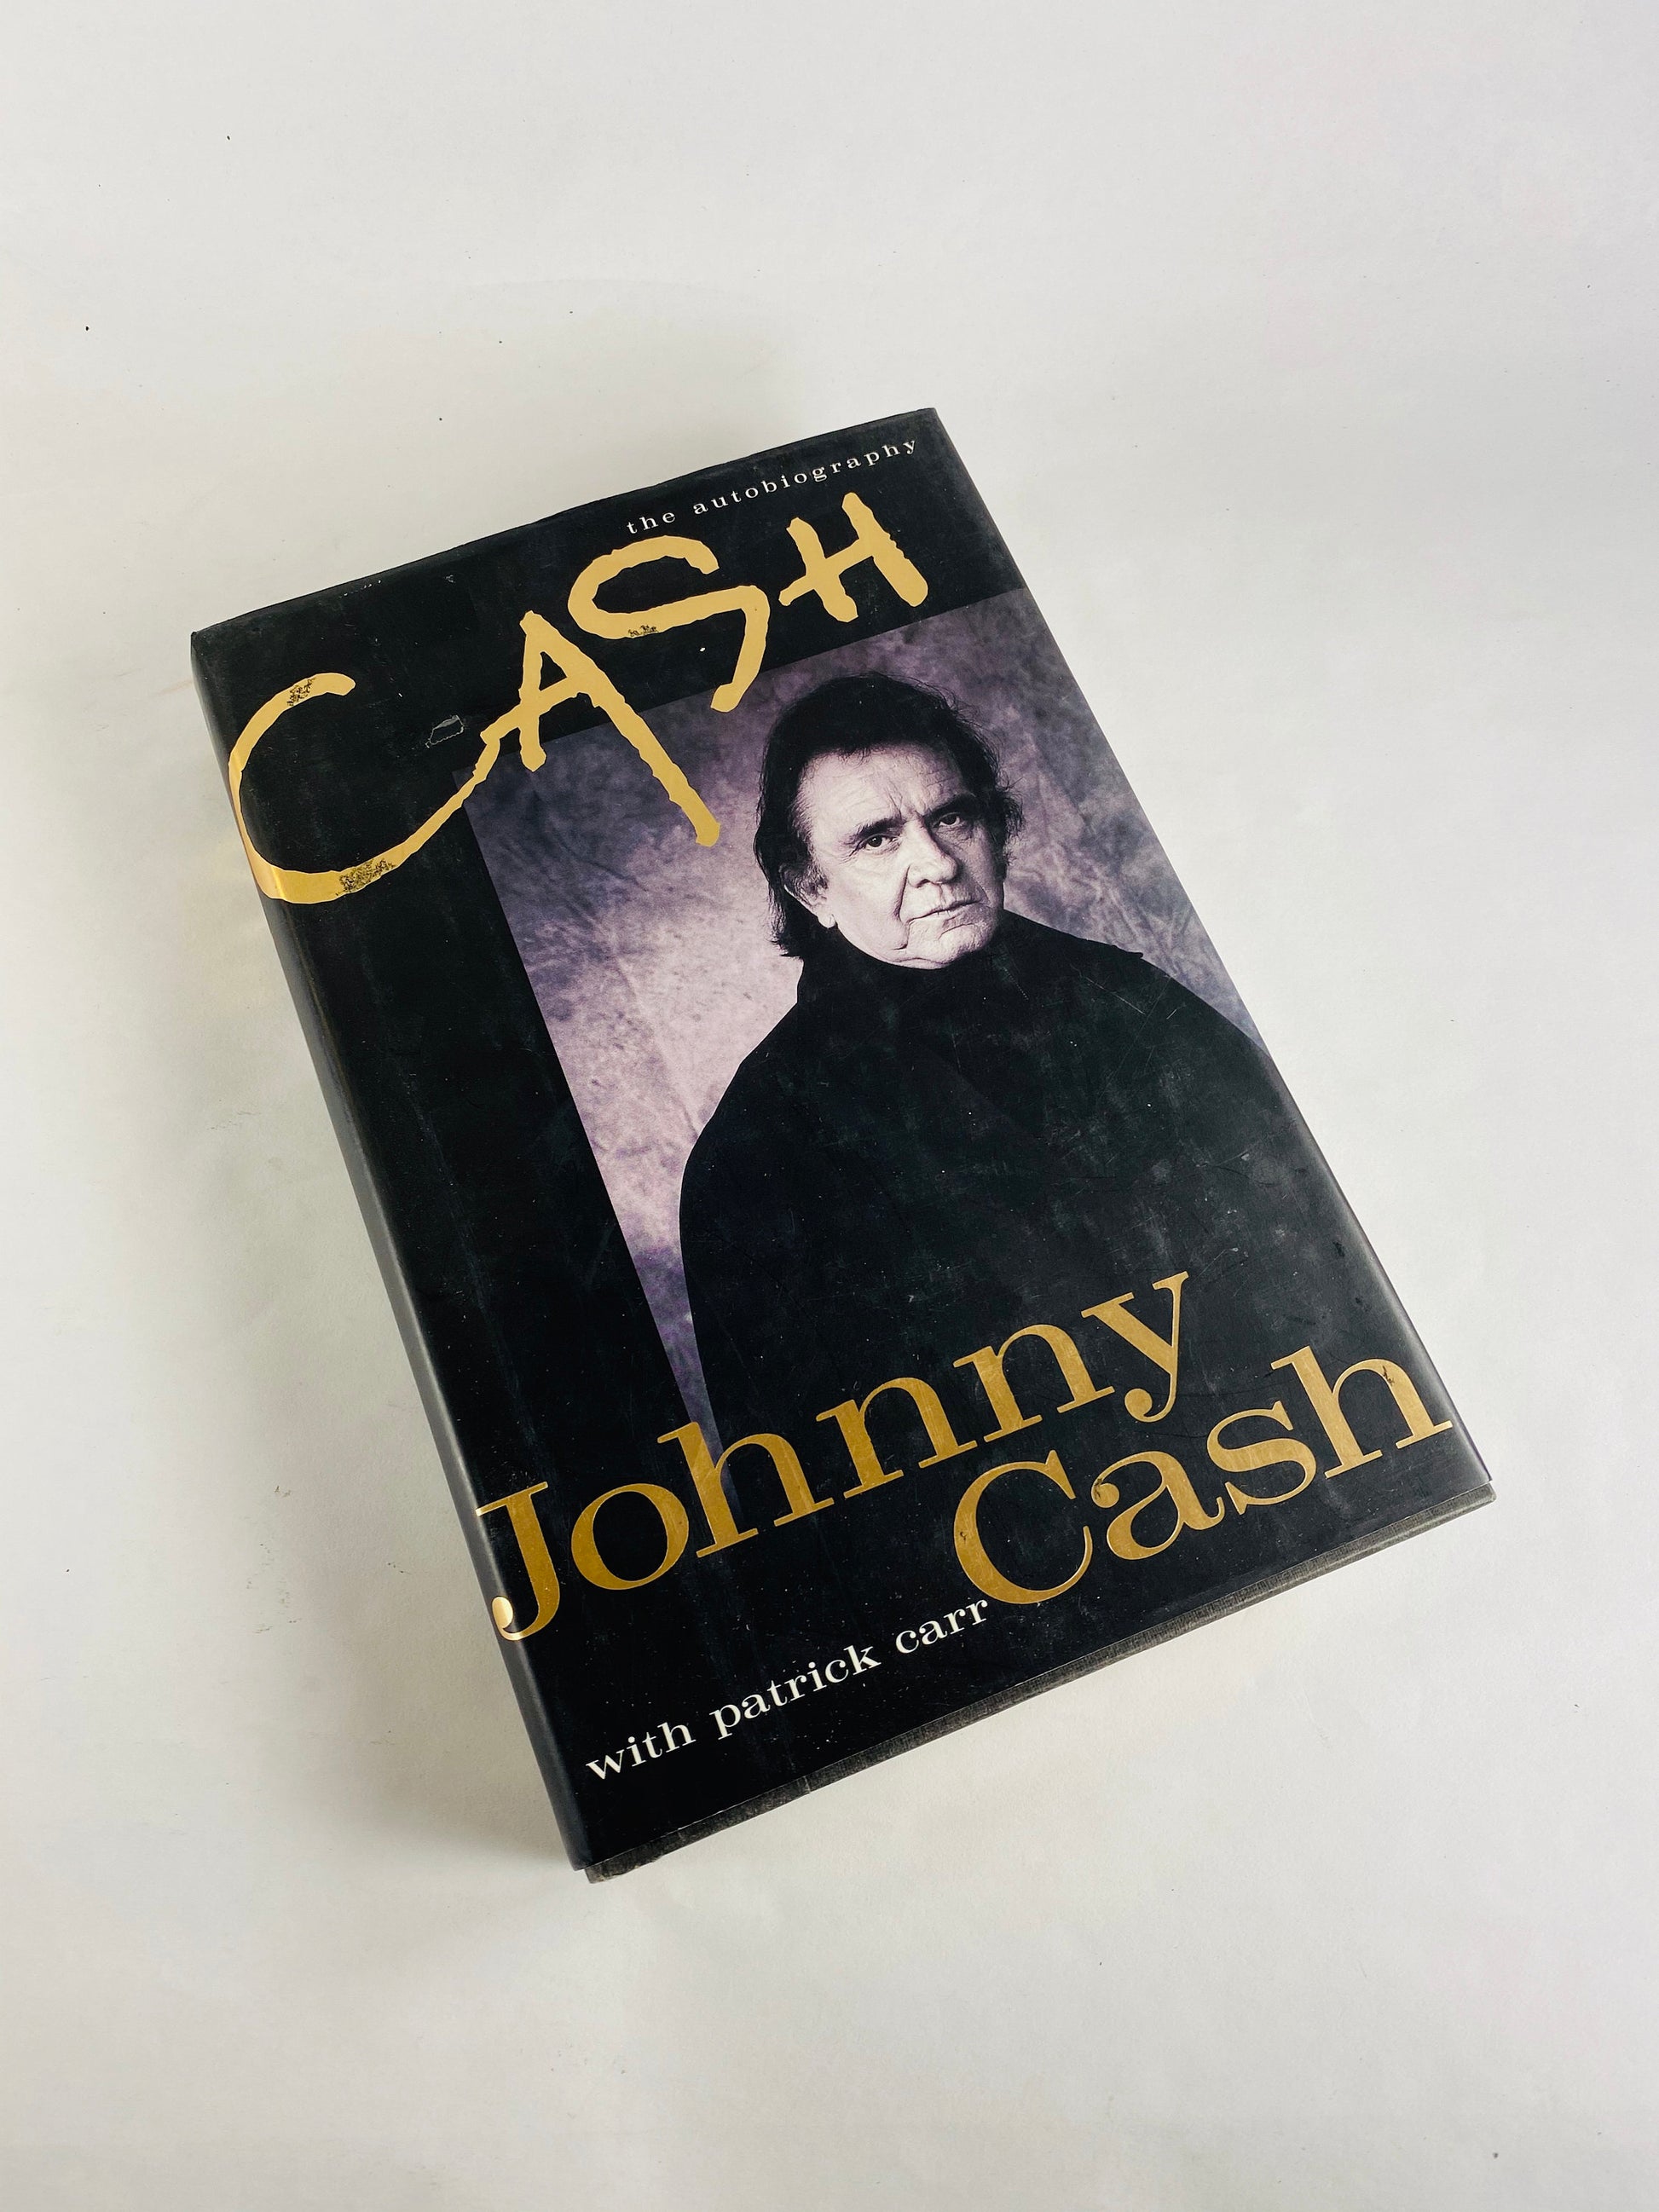 Johnny Cash FIRST EDITION vintage autobiography book with Patrick Carr circa 1997. Fantastic music gift Outlaw Country